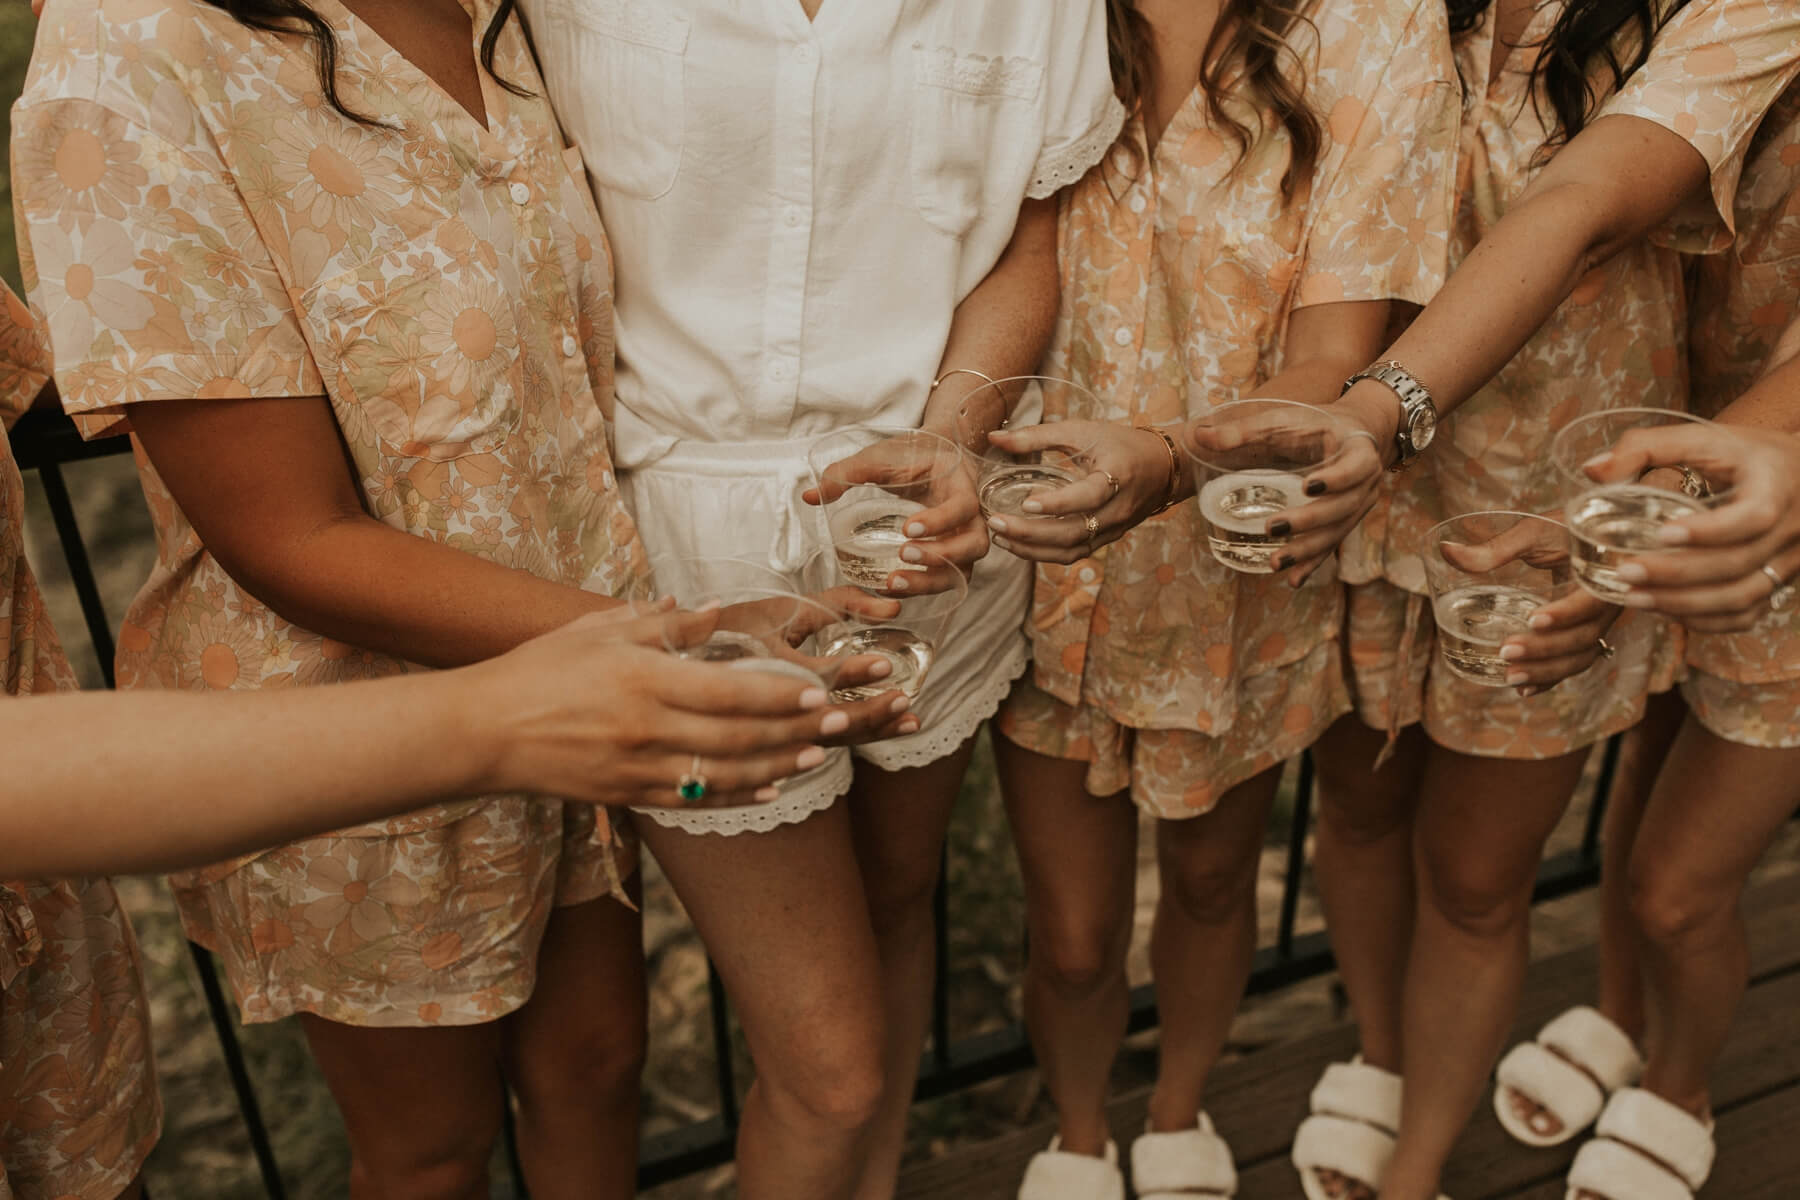 Bridesmaids and bride wearing matching pajamas and slippers doing a champagne toast